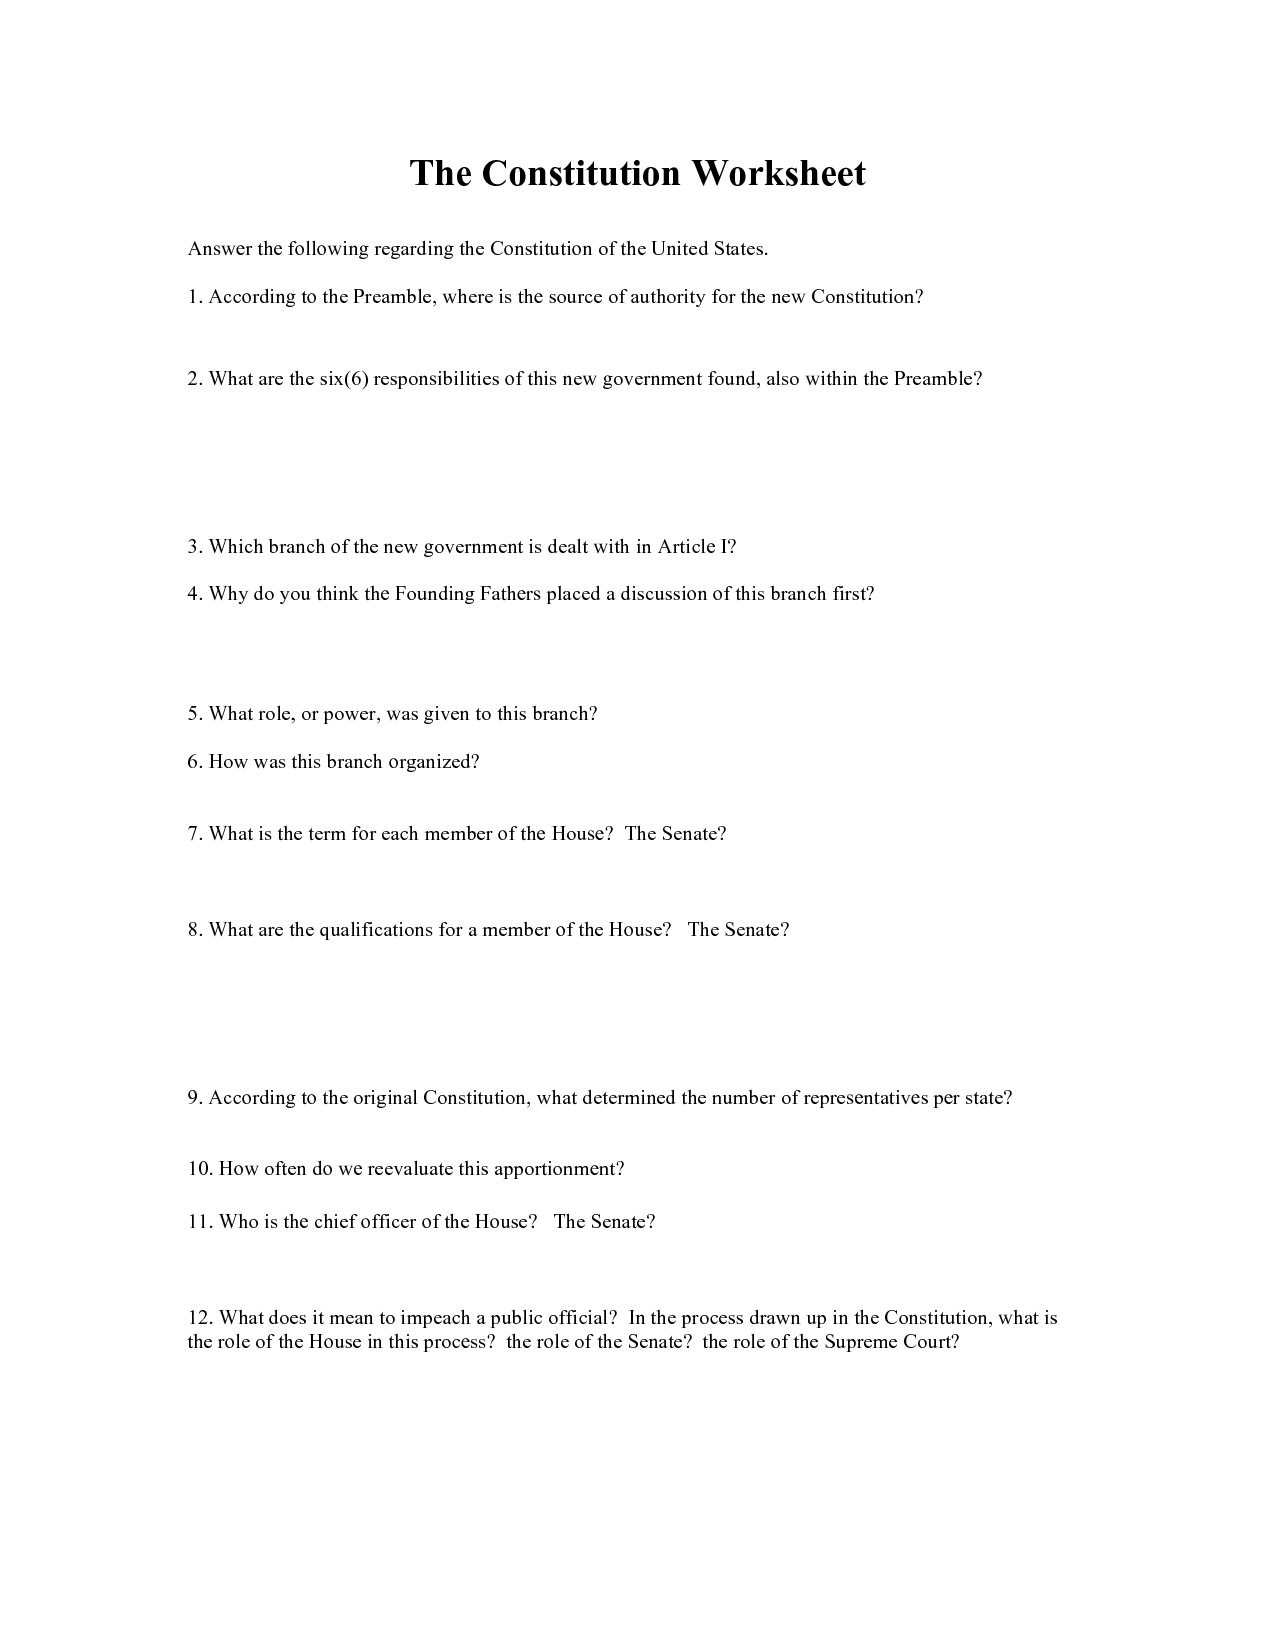 U.S. Constitution Worksheet Answers Image